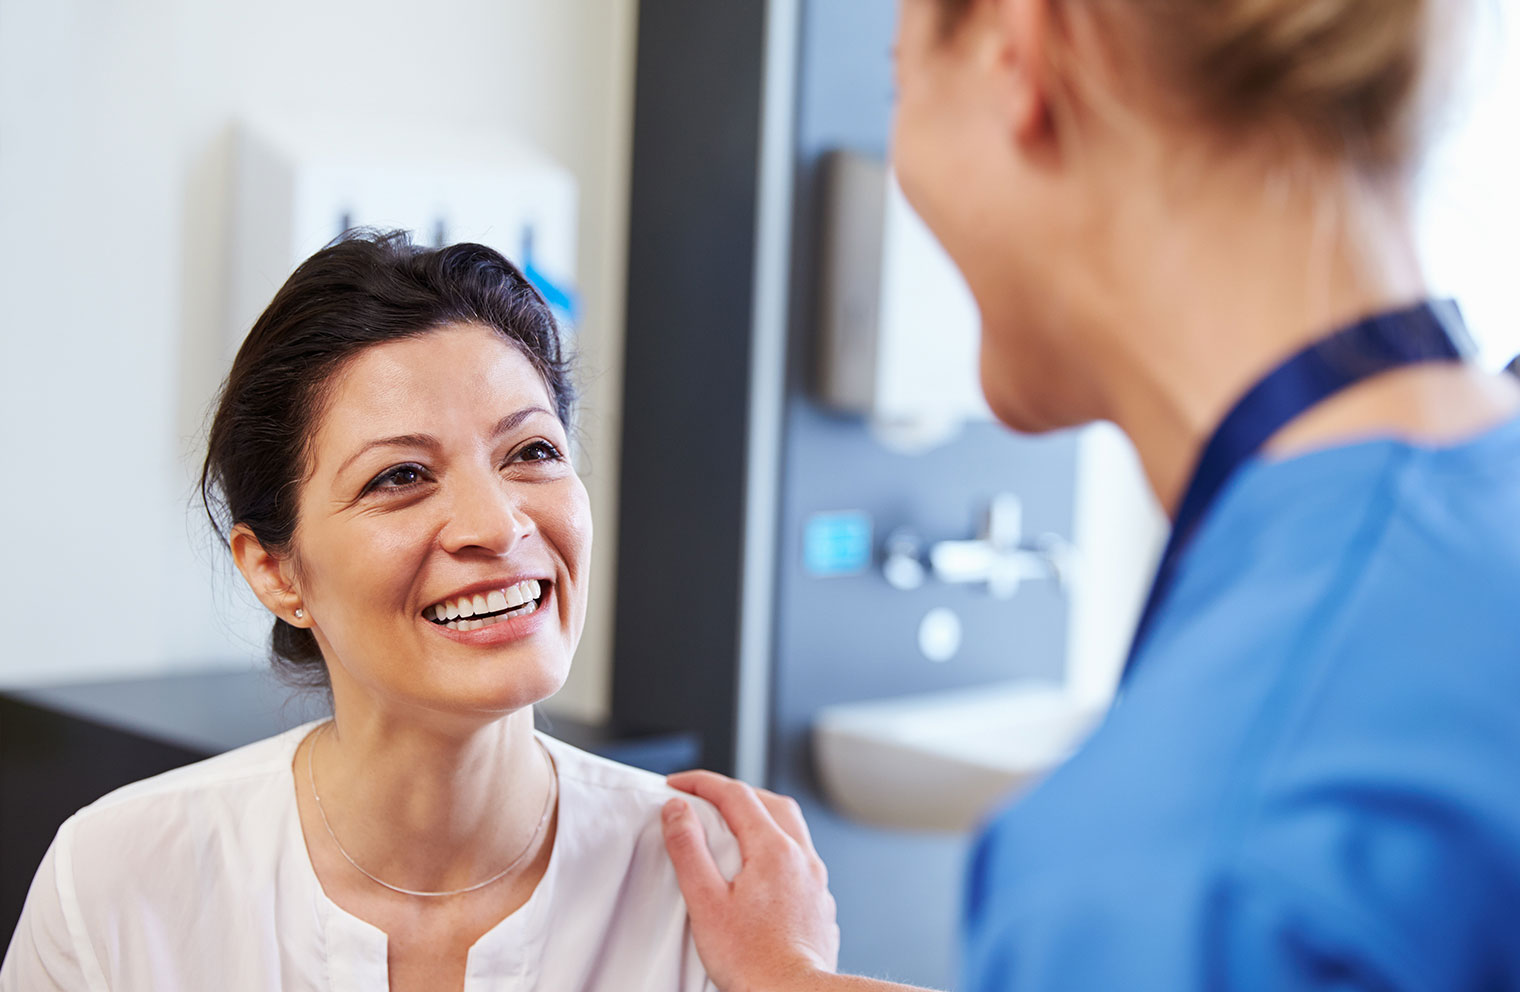 Image of woman smiling as she receives checkup from female doctor.